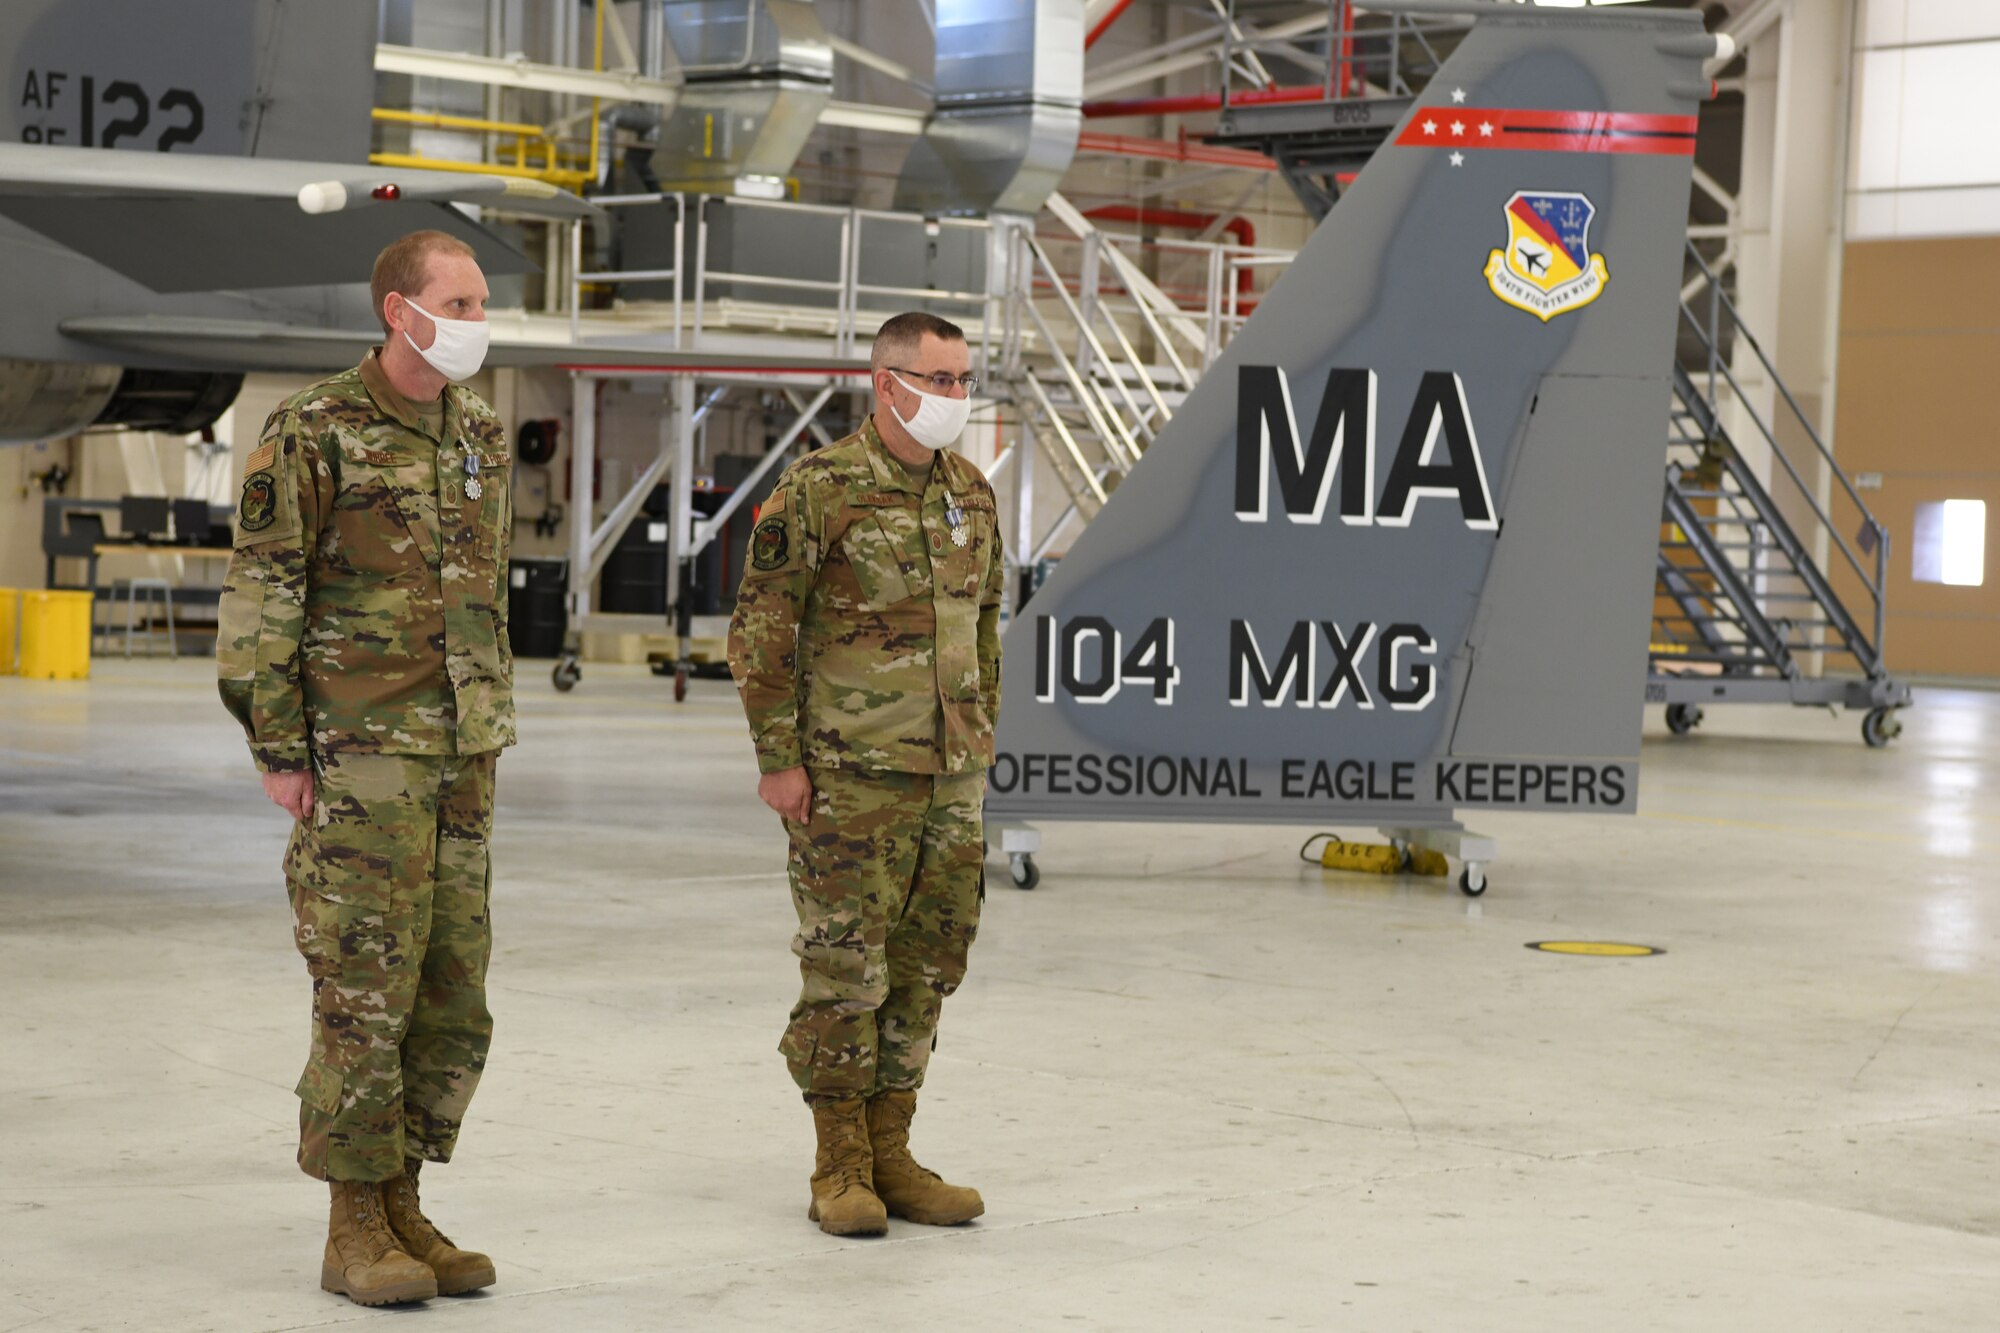 Master Sgt. Leo Burbee, 104th Maintenance Group structural maintenance supervisor, and Master Sgt. Bob Oleksak, 104MXG fabrication element supervisor, stand at attention after receiving the Air Force Achievement Medal during a ceremony Nov. 14, 2020, at Barnes Air National Guard Base, Massachusetts.